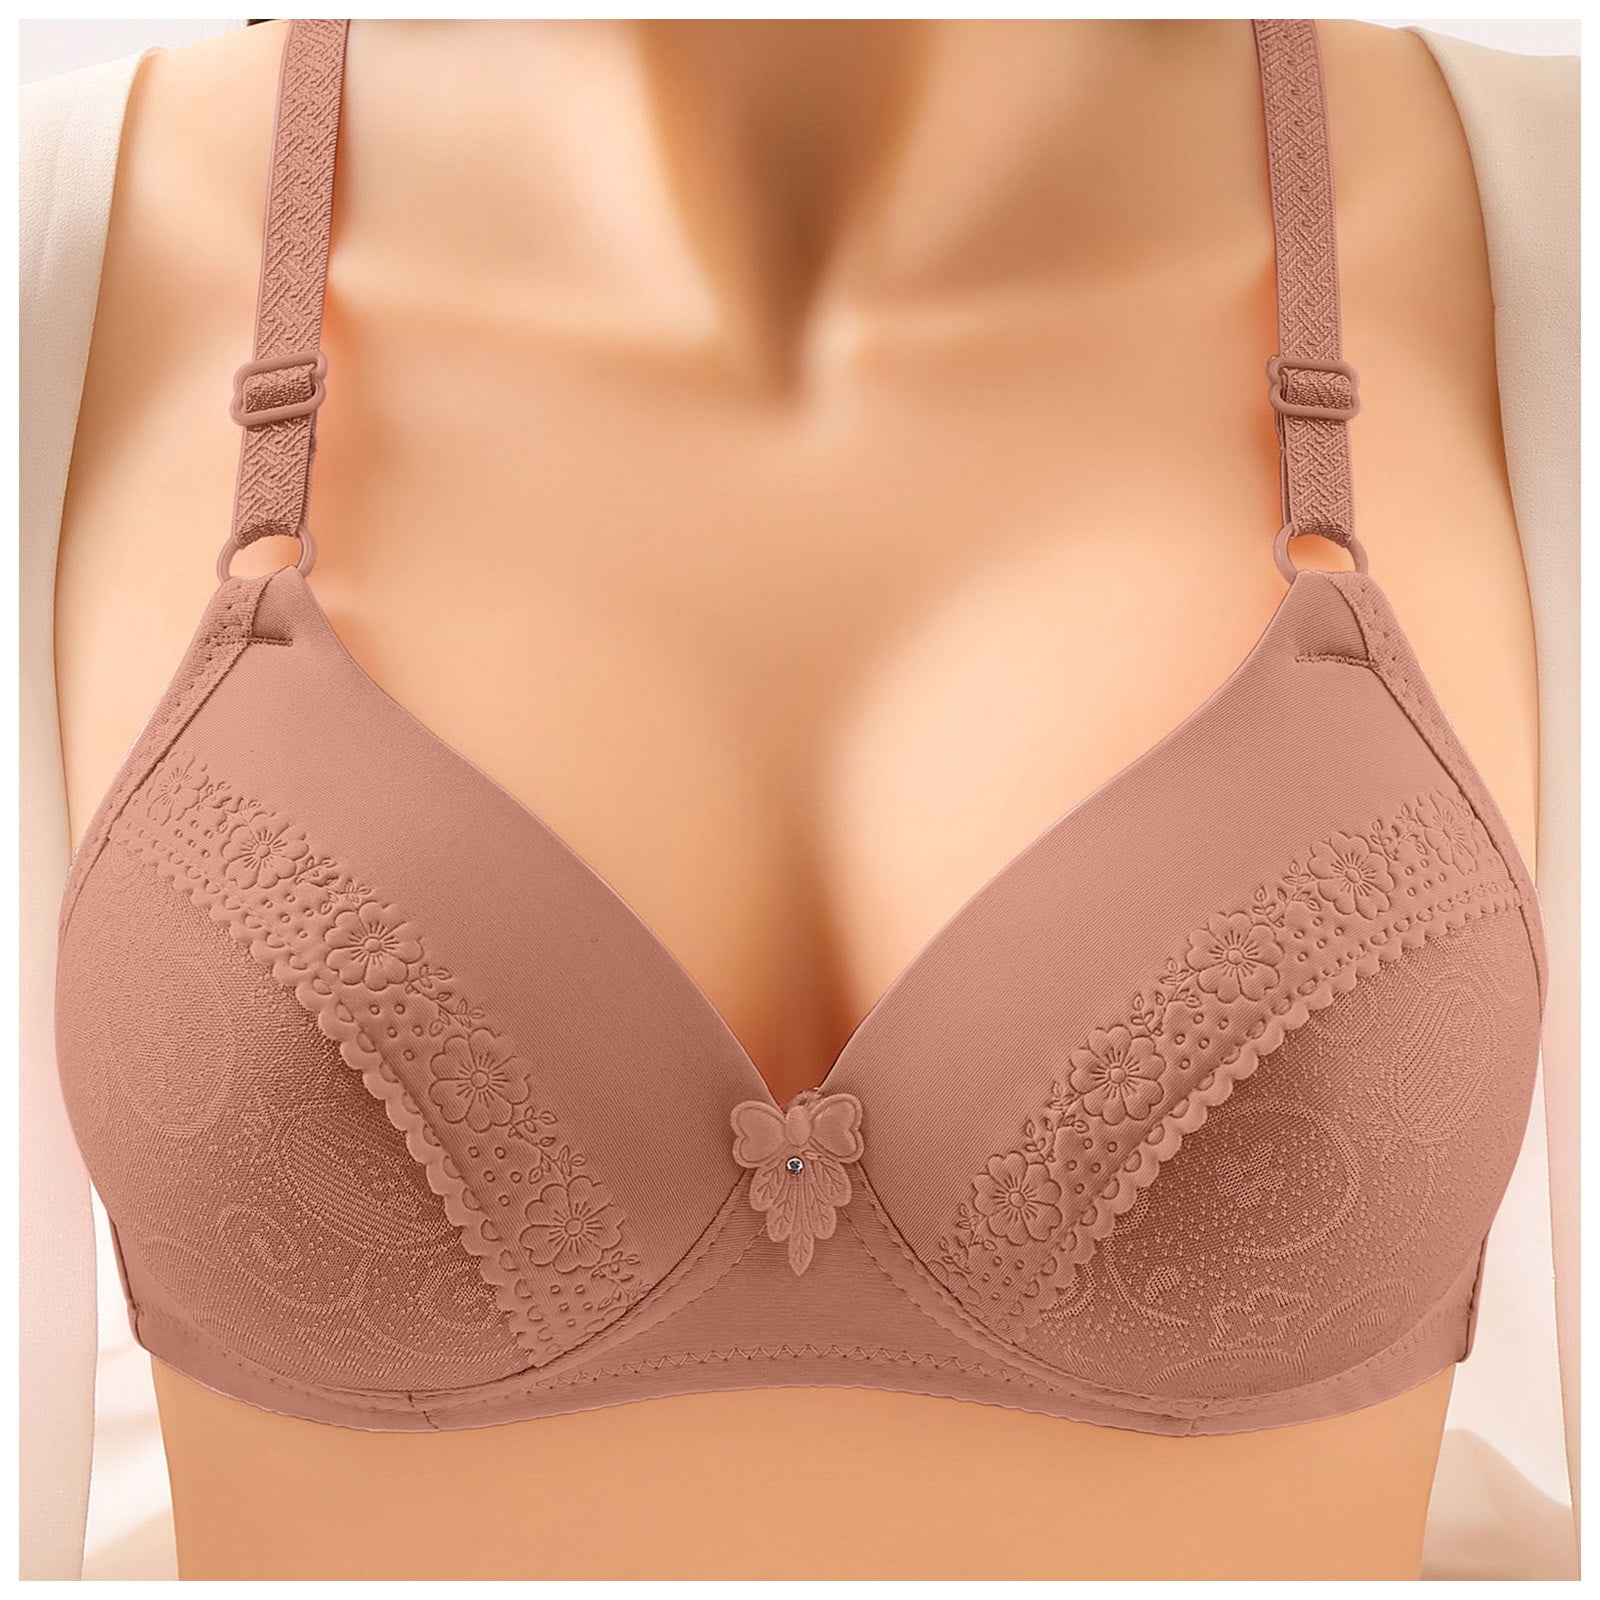 Women's New Comfortable Large Bra D Cup Thin Style No Steel Ring